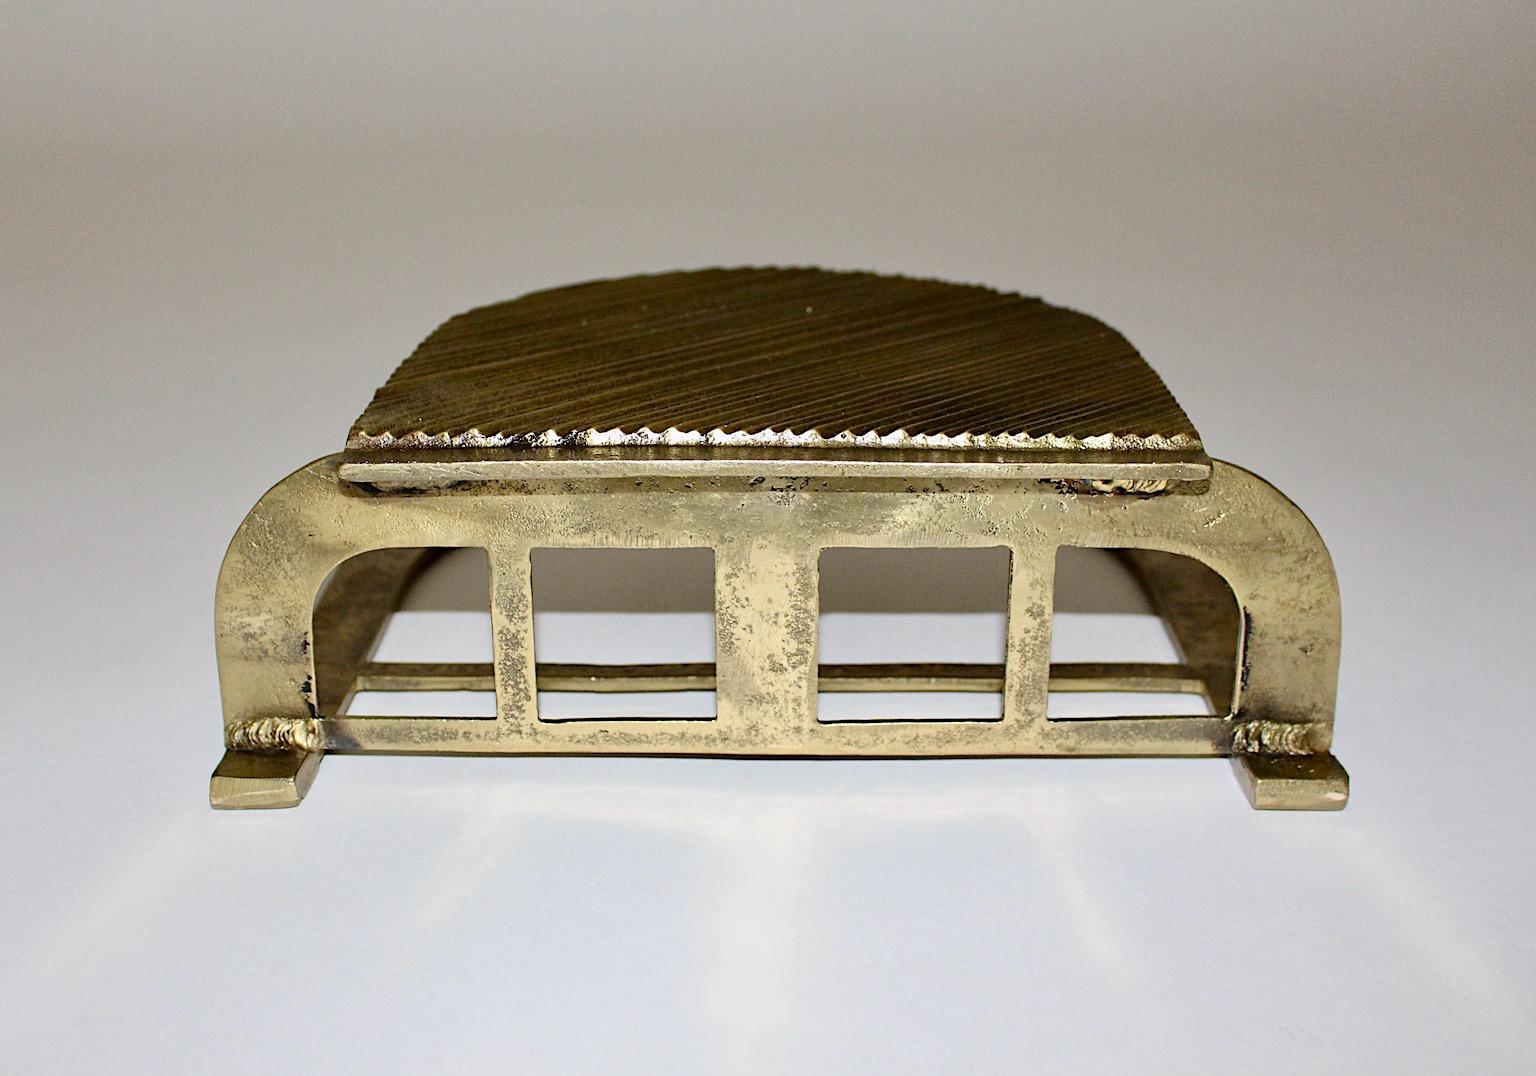 Art Deco vintage newspaper rack or magazine rack from solid brass circa 1900 - 1920, Austria.
While the front of the newspaper rack features a grooved front, the base shows squared pattern and the back flows into a round arch.
Could be paired as a